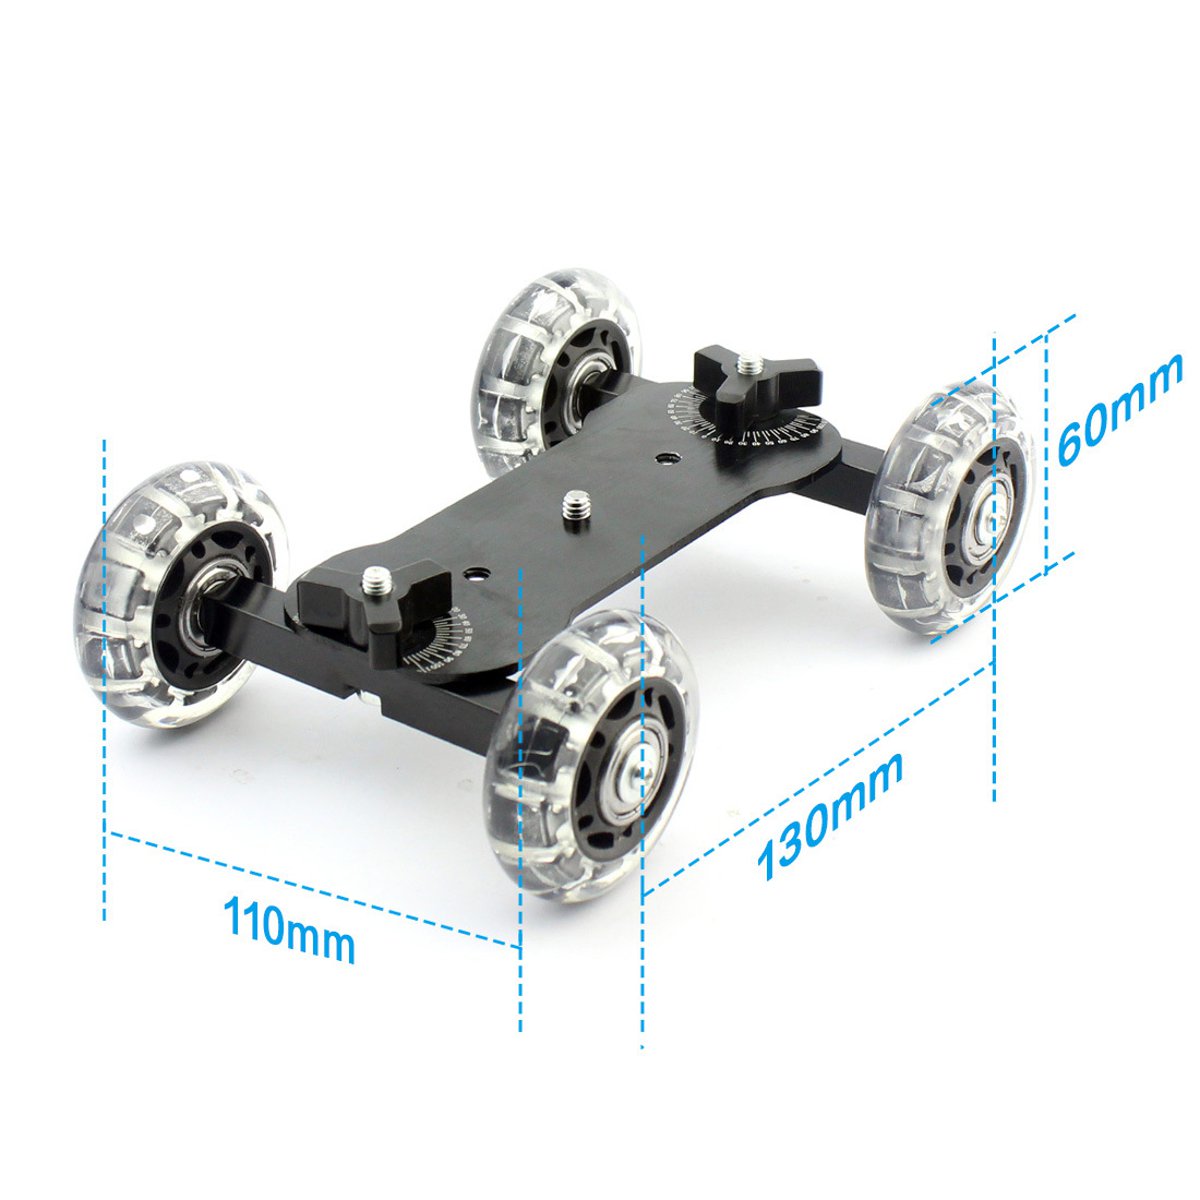 Table Camera Video Wheels Rail Rolling Track Slider Dolly Car Glide Set Stabilizer Skater Rail System Photo Studio Accessories